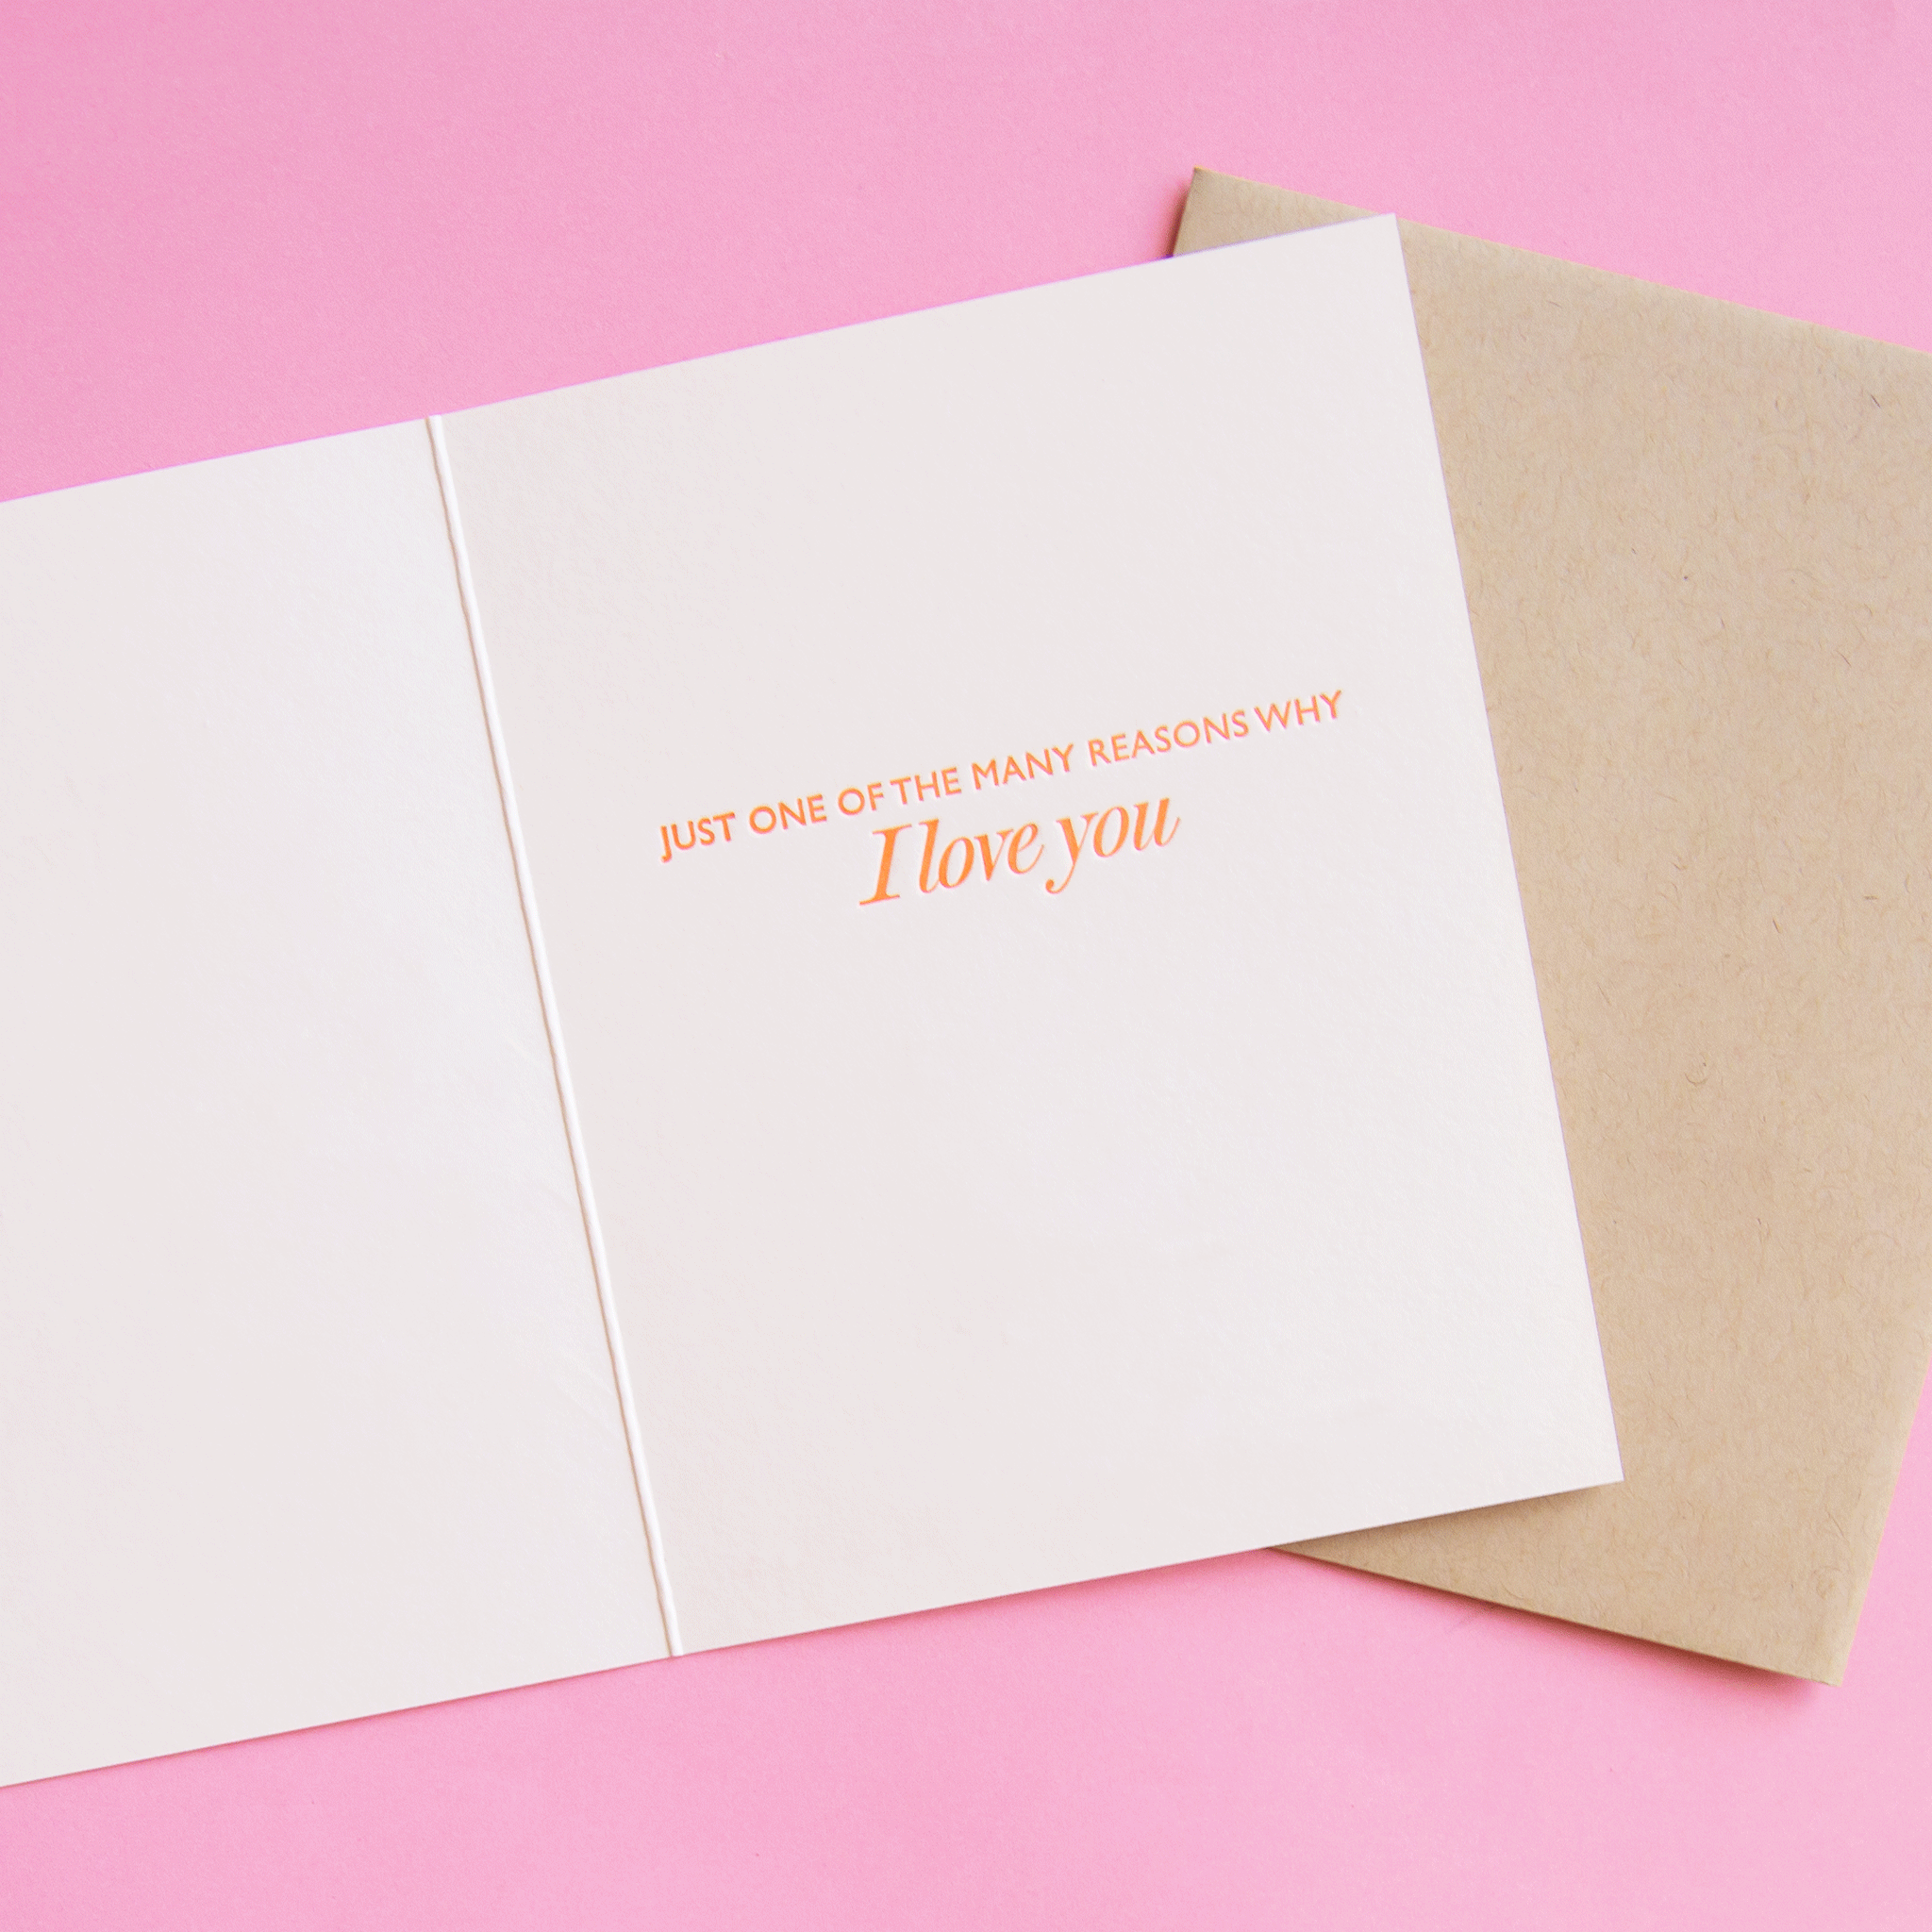 On a pink background is a white card with text inside that reads, "Just One Of The Many Reasons Why I Love You". 